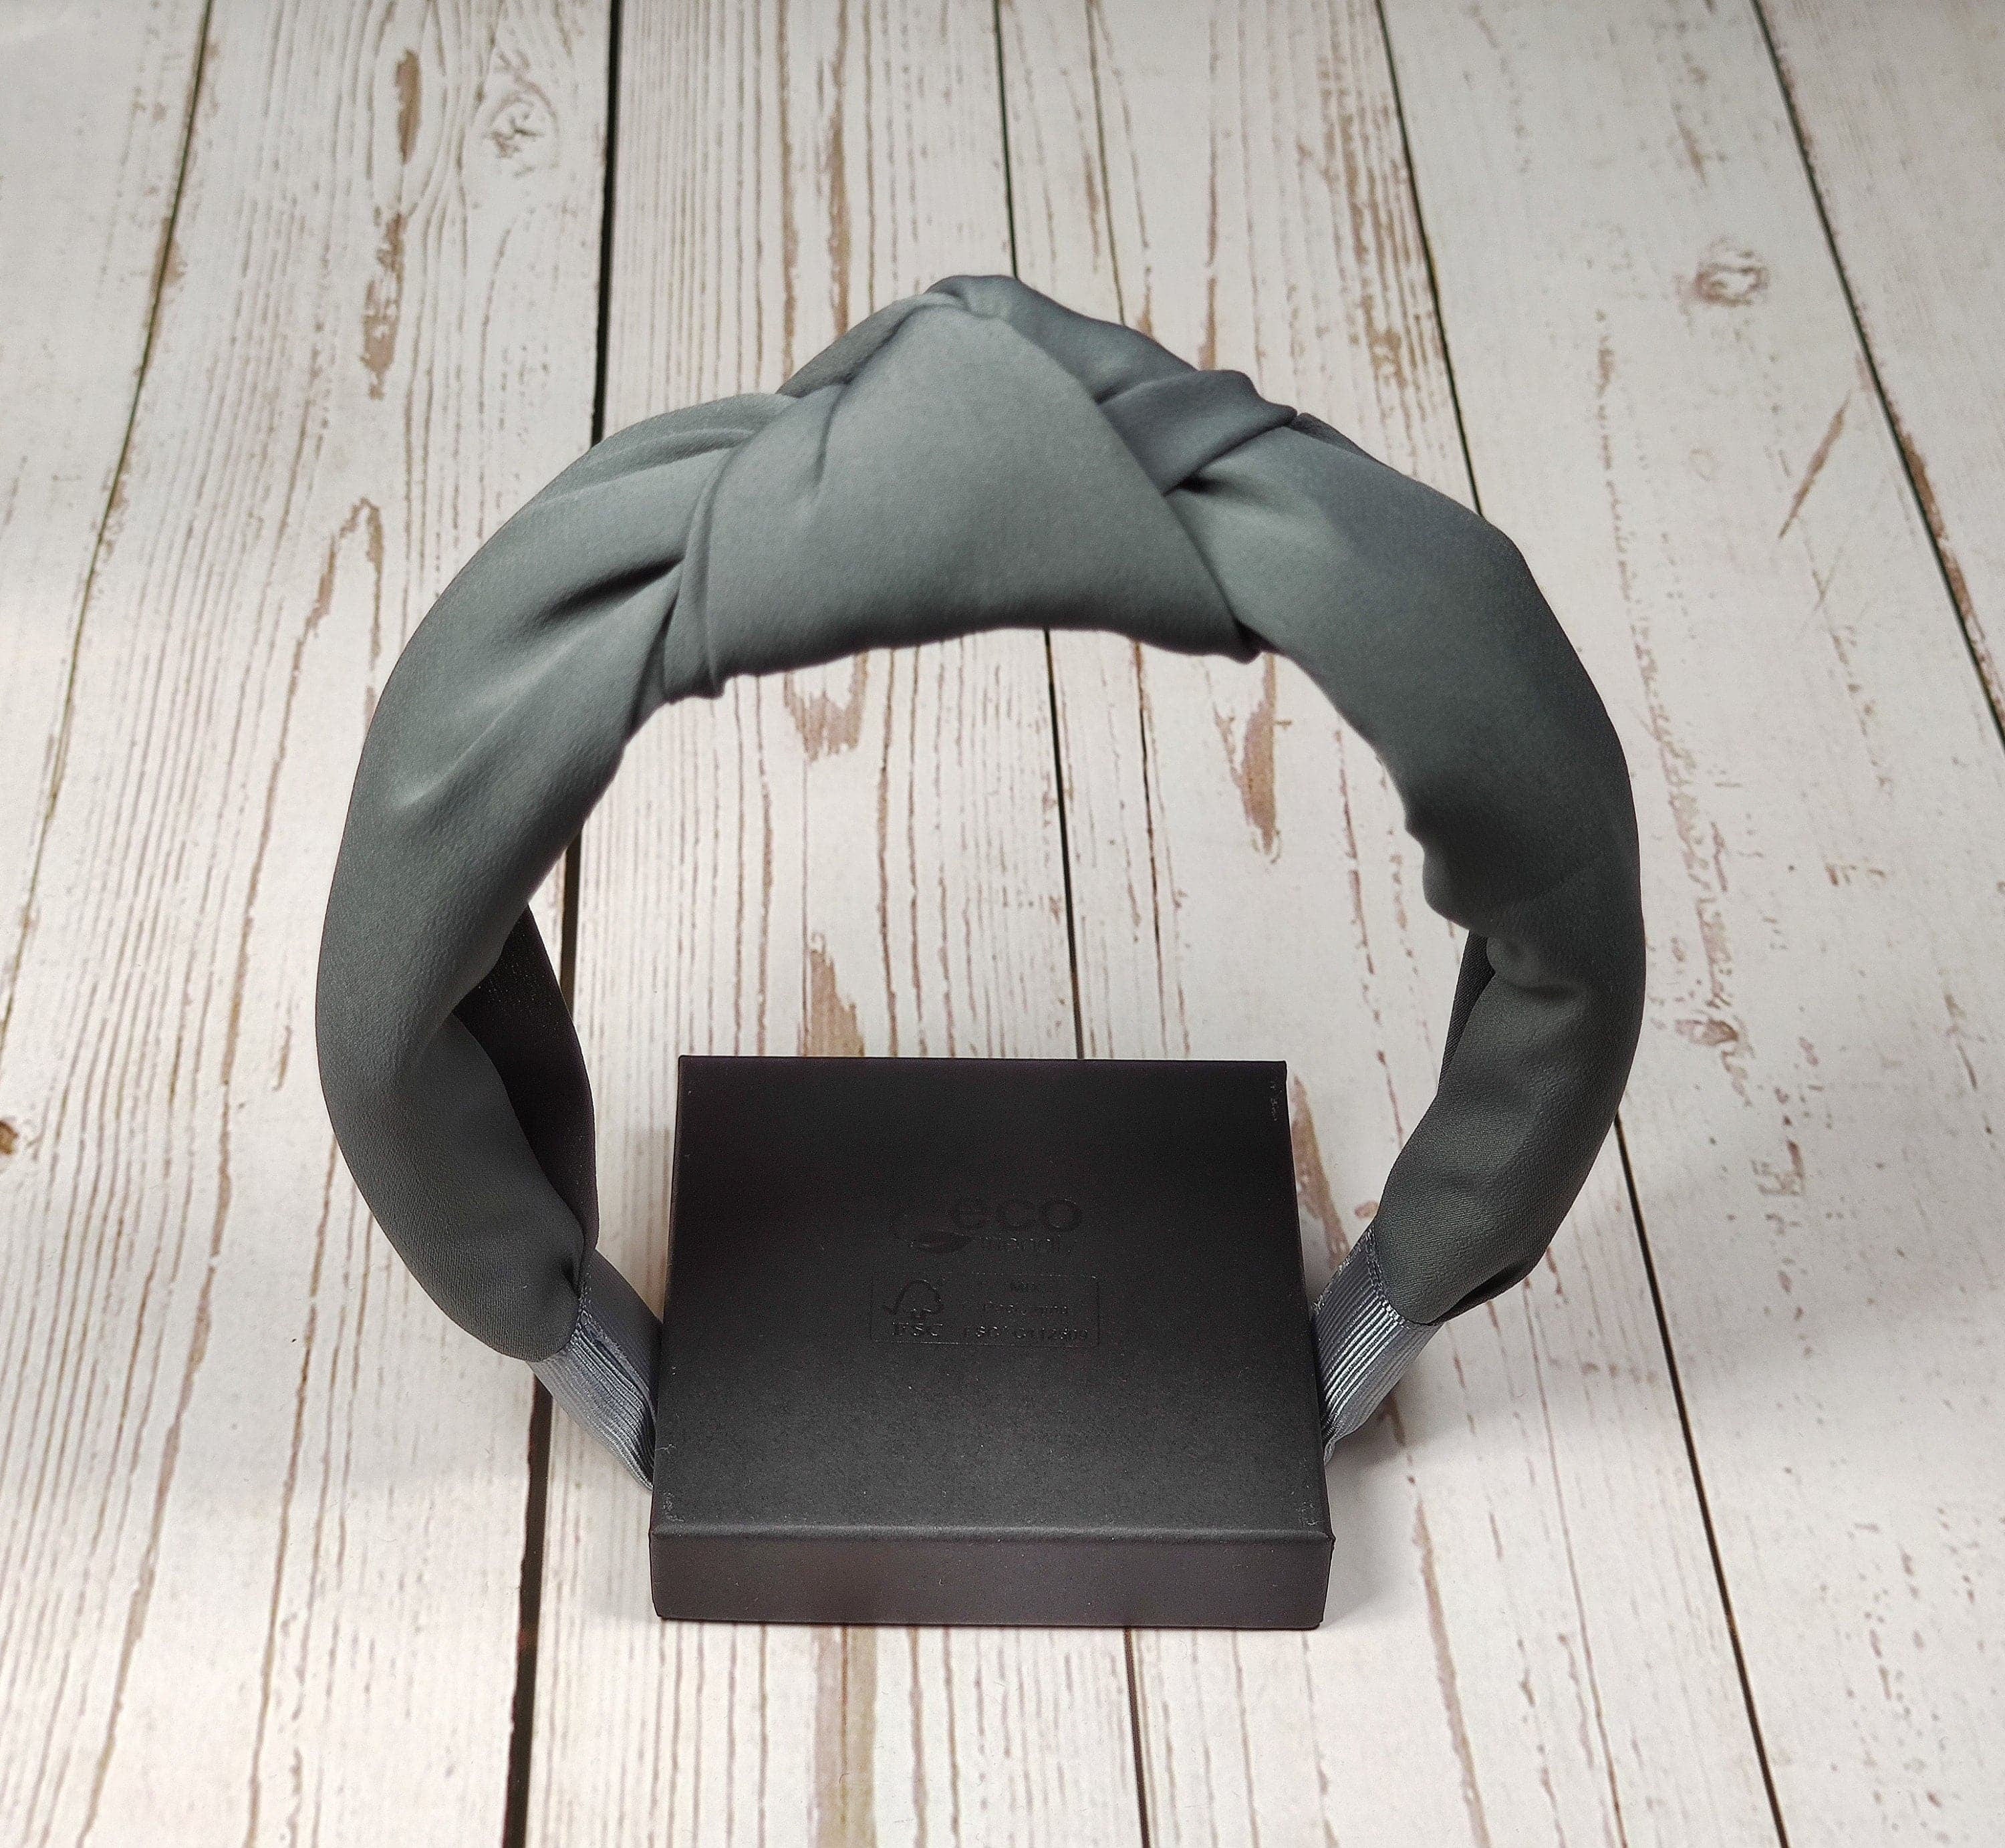 Get your stylish and comfortable Gray Twist Knot Headband from now onwards! This headband is made from soft and durable viscose crepe, making it perfect for all your fashion needs.